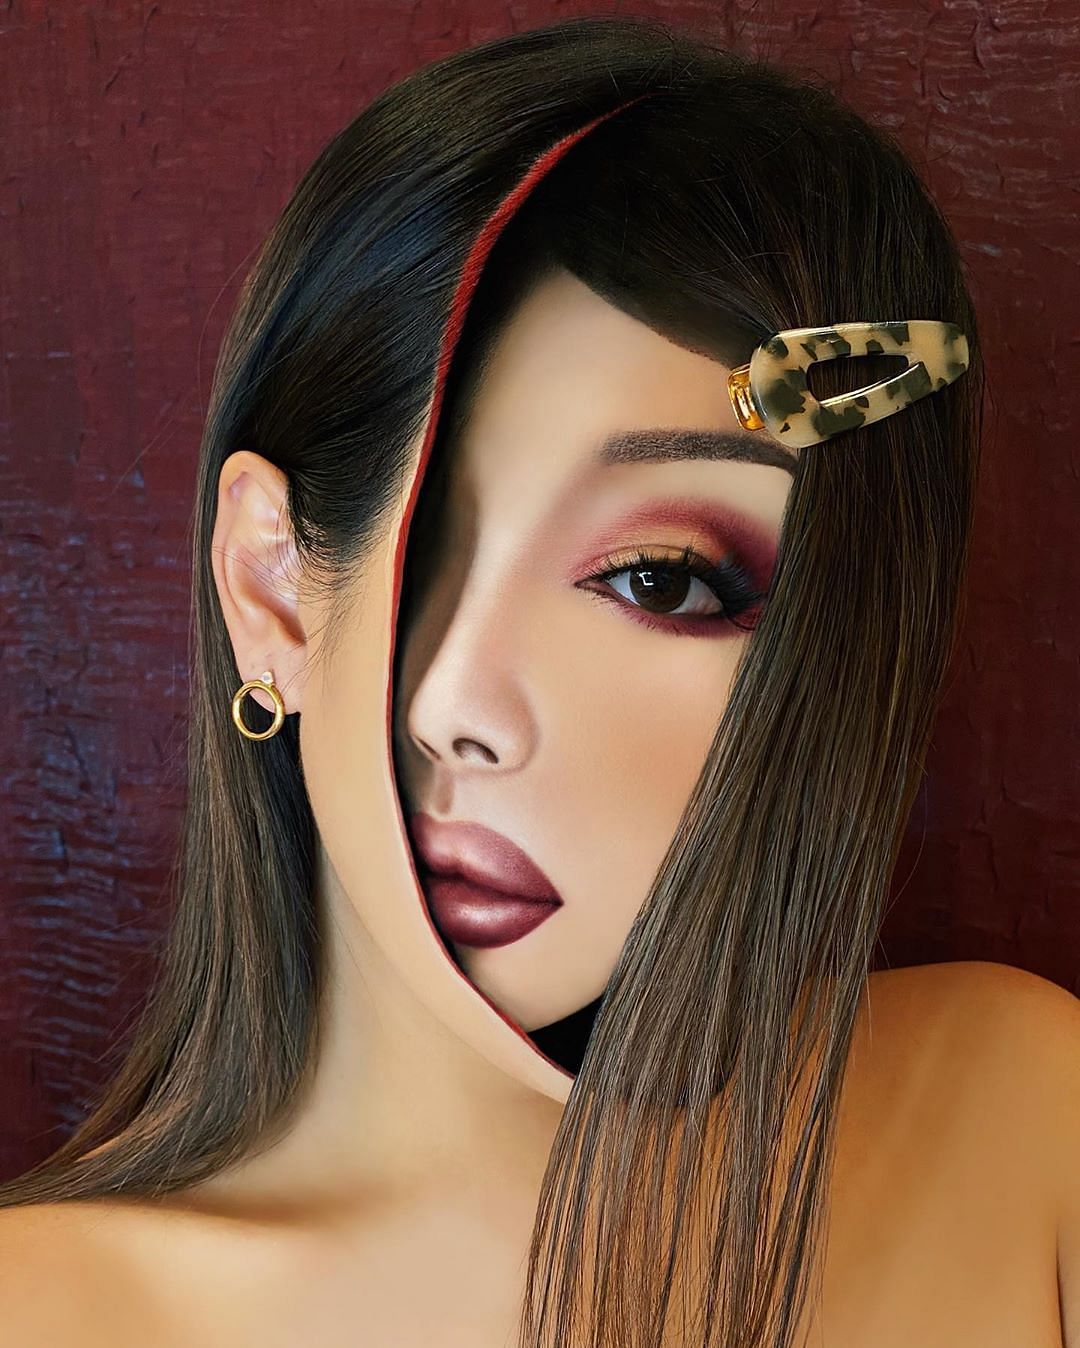 mimi choi Makeup artist did unbelievable makeup and artwork people got confused